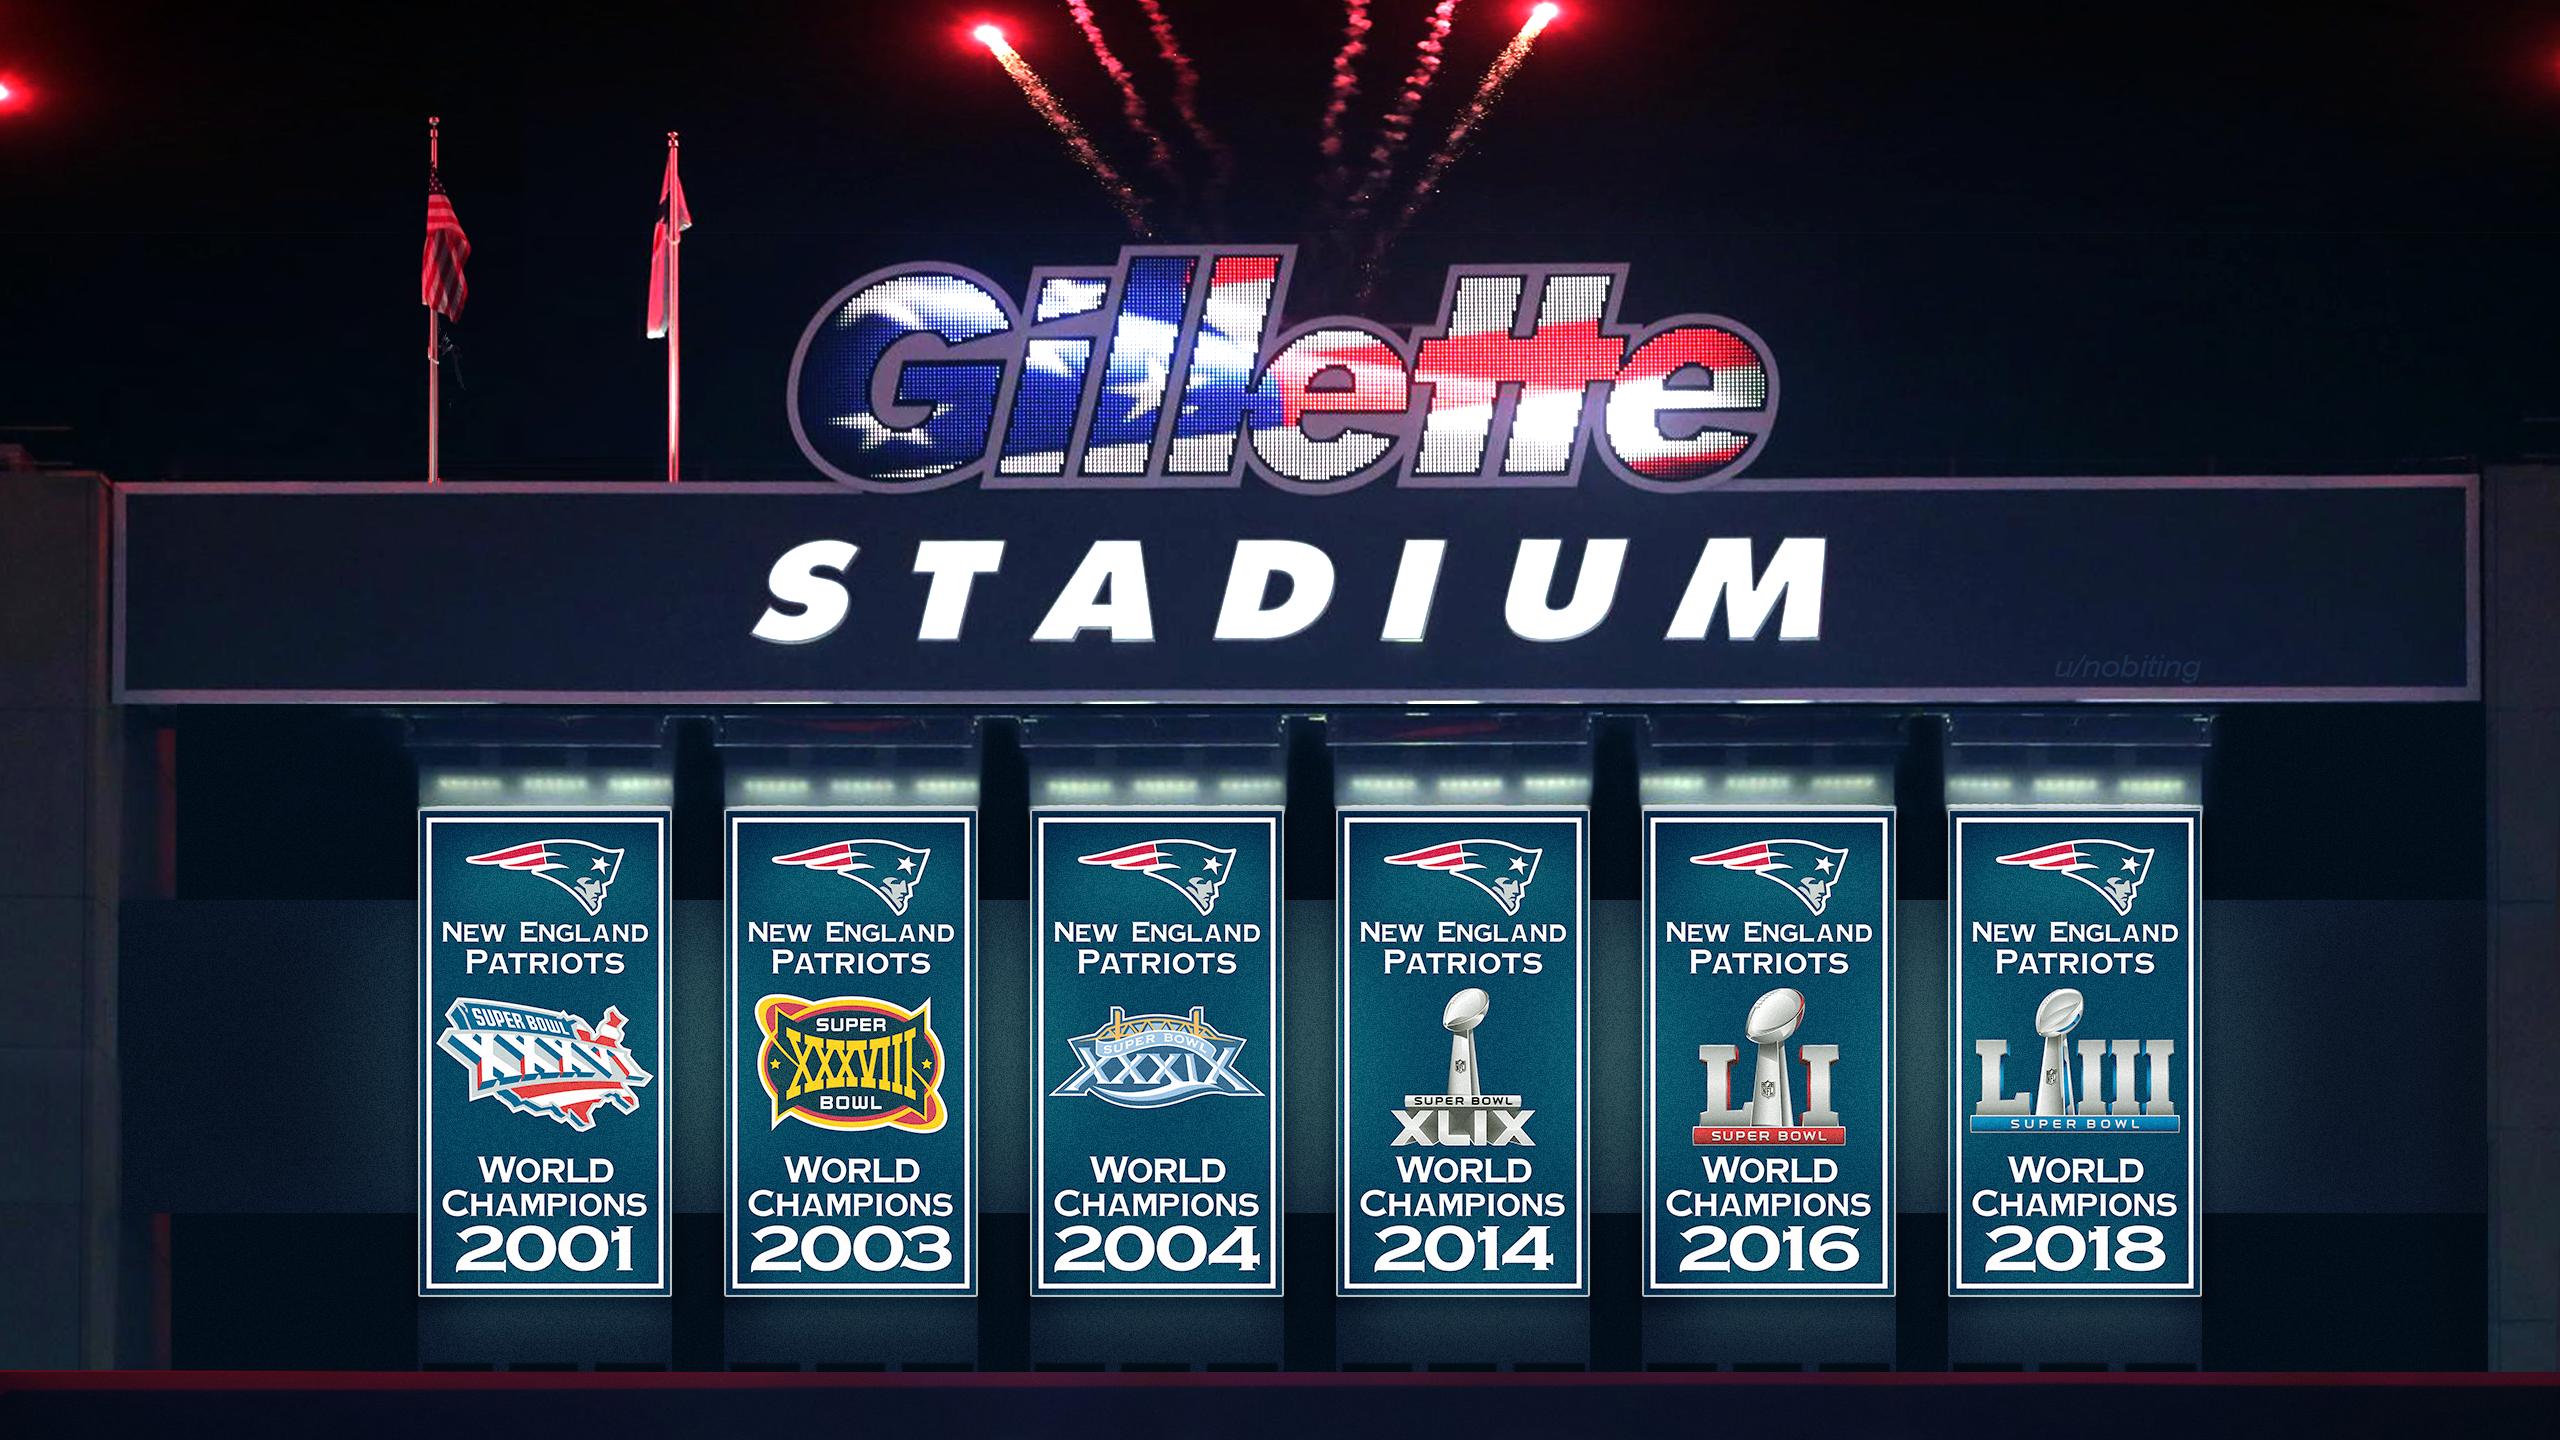 UPDATED GILLETTE STADIUM SUPER BOWL BANNERS (6X) (Photoshop by me, feel free to use as wallpaper): Patriots